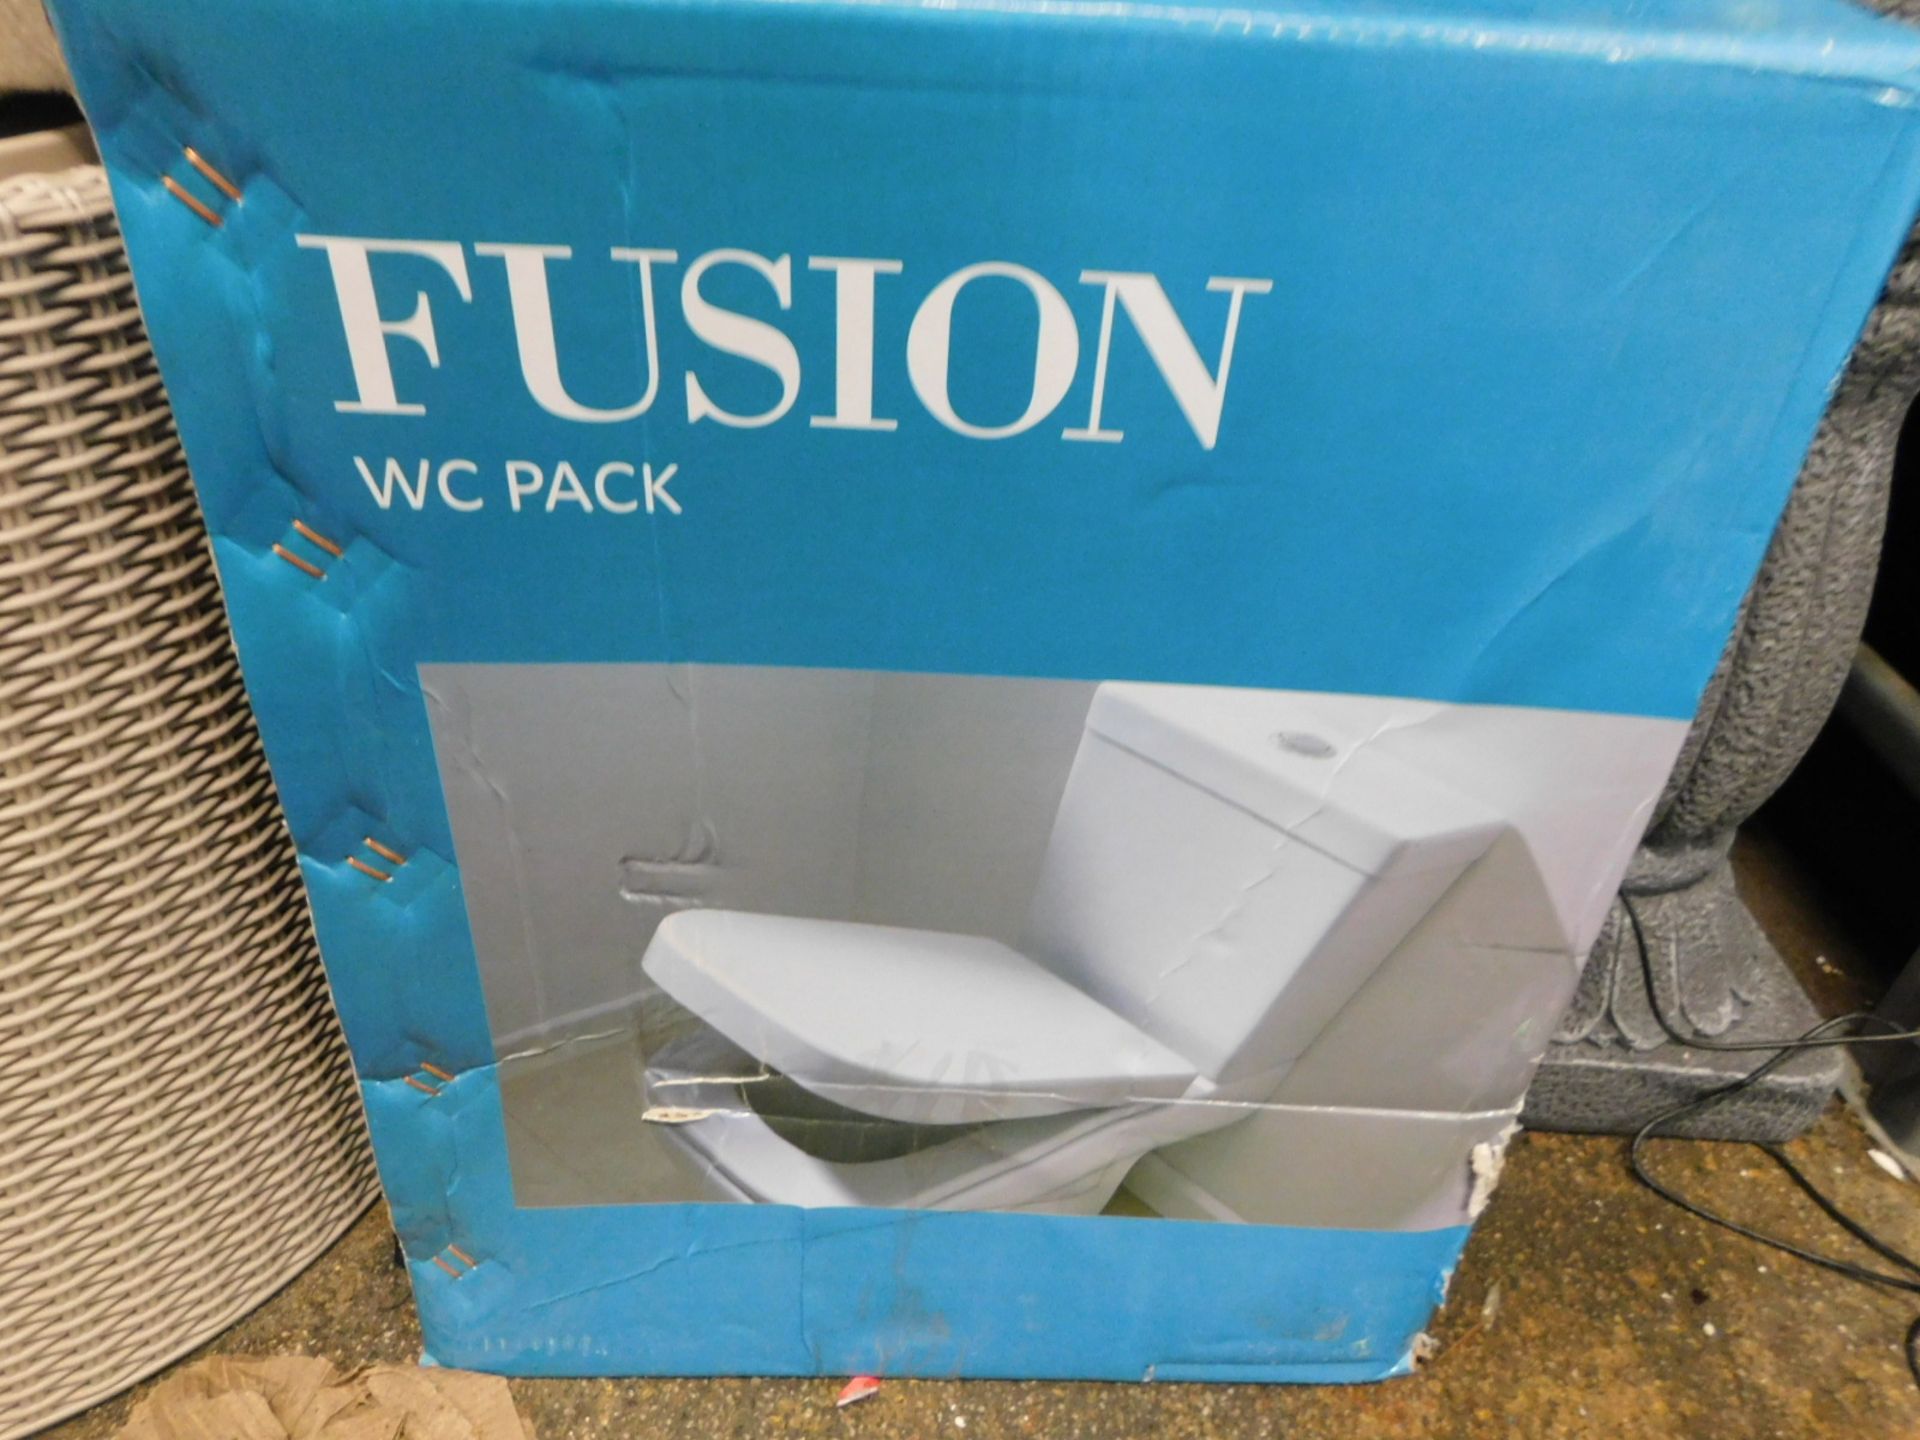 1 BOXED TAVISTOCK FUSION WC PACK CONSISTING OF WC, CISTERN AND SEAT RRP £199.99